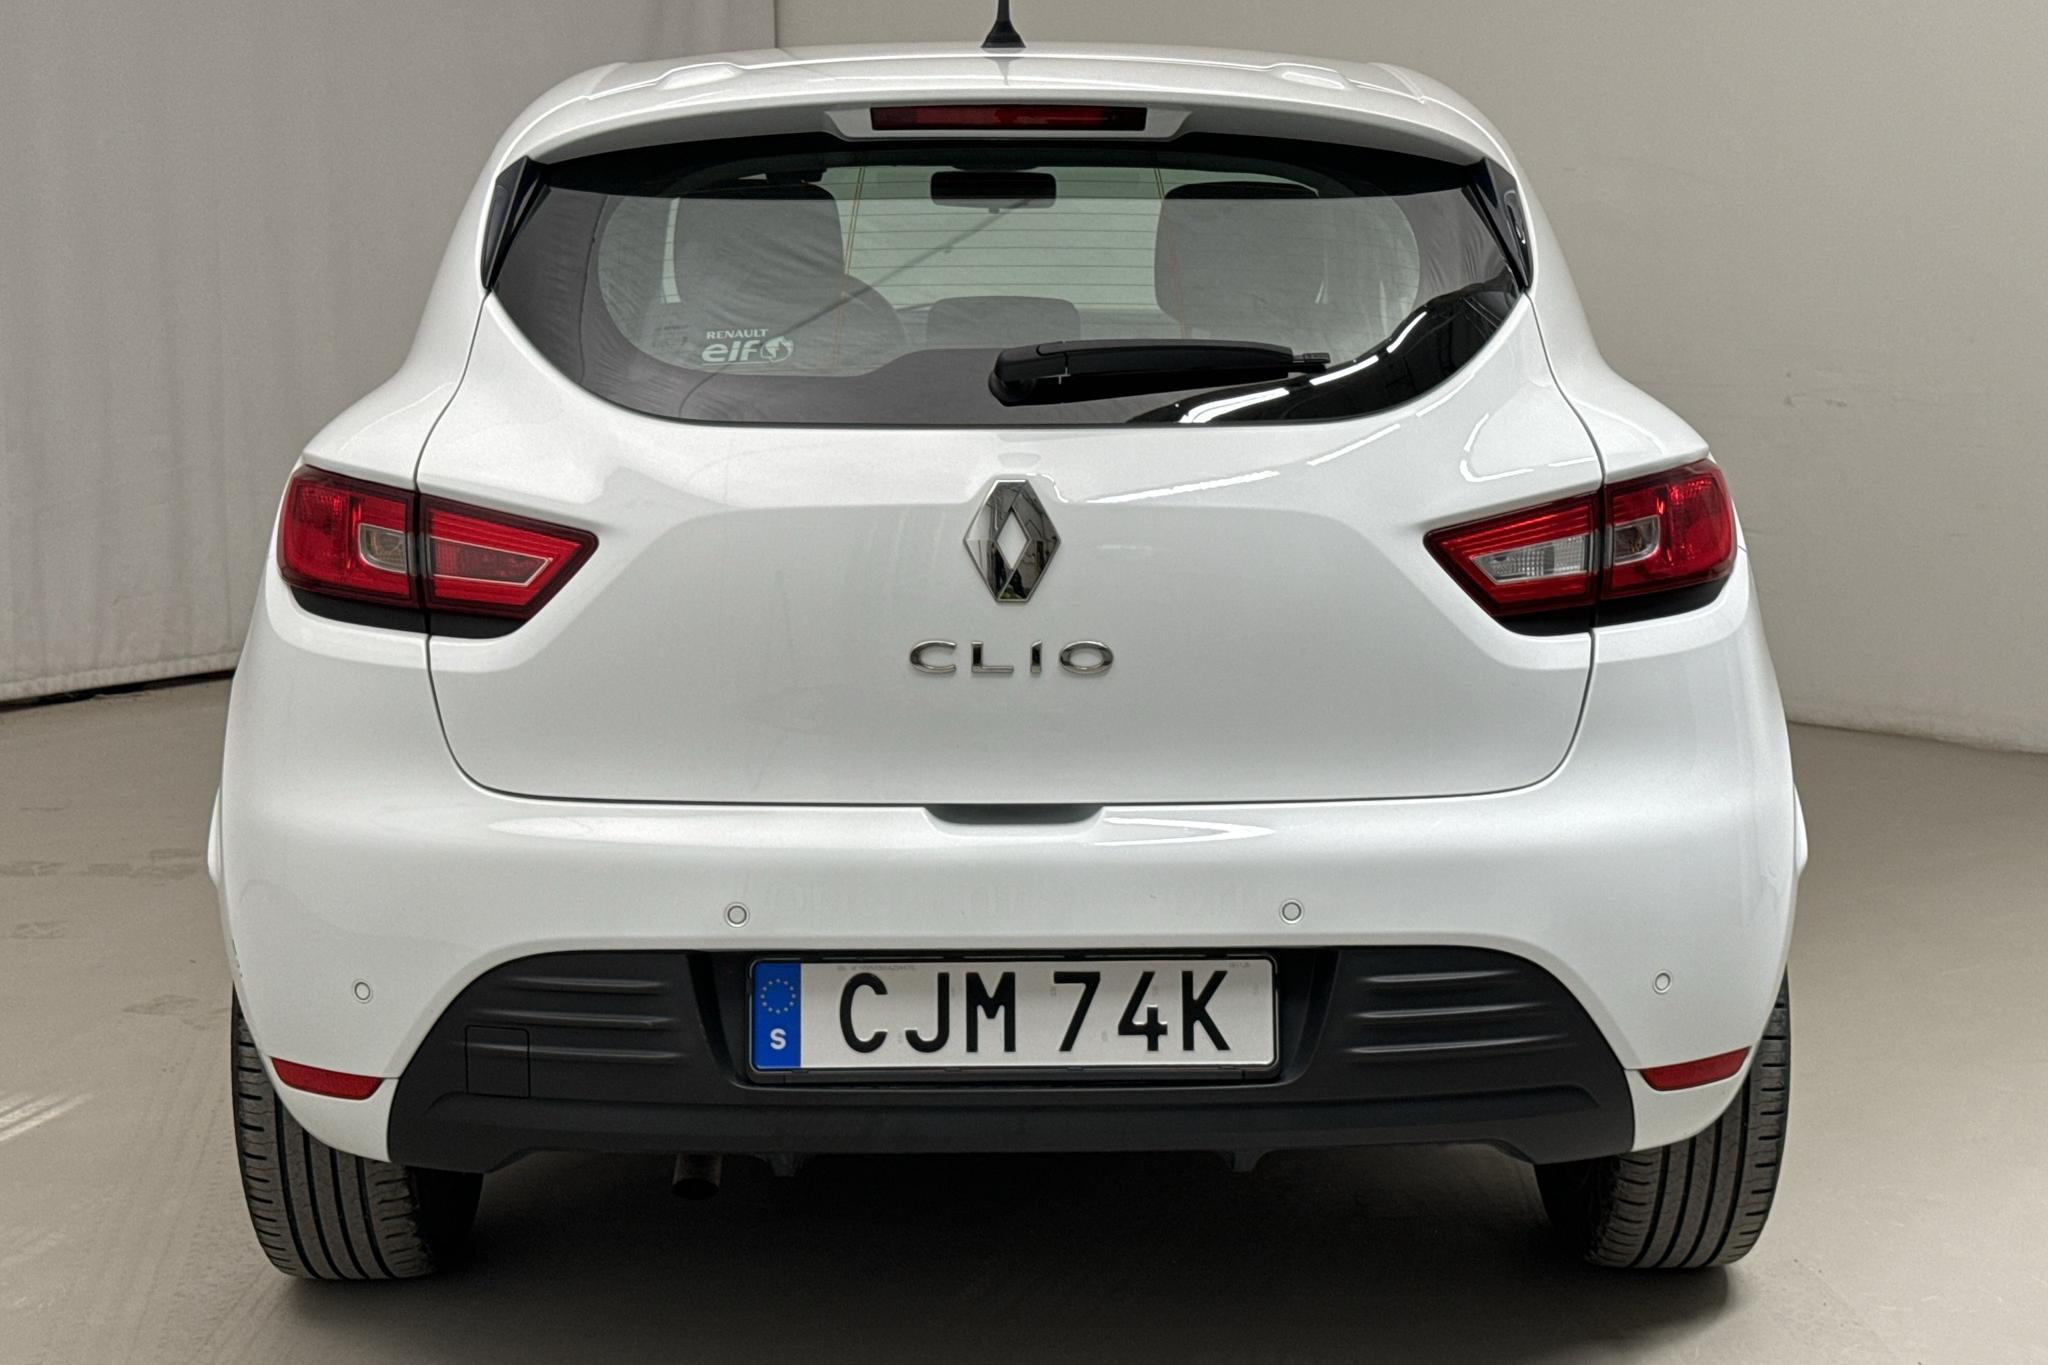 Renault Clio IV 0.9 TCe 90 5dr (90hk) - 93 630 km - Manual - white - 2020